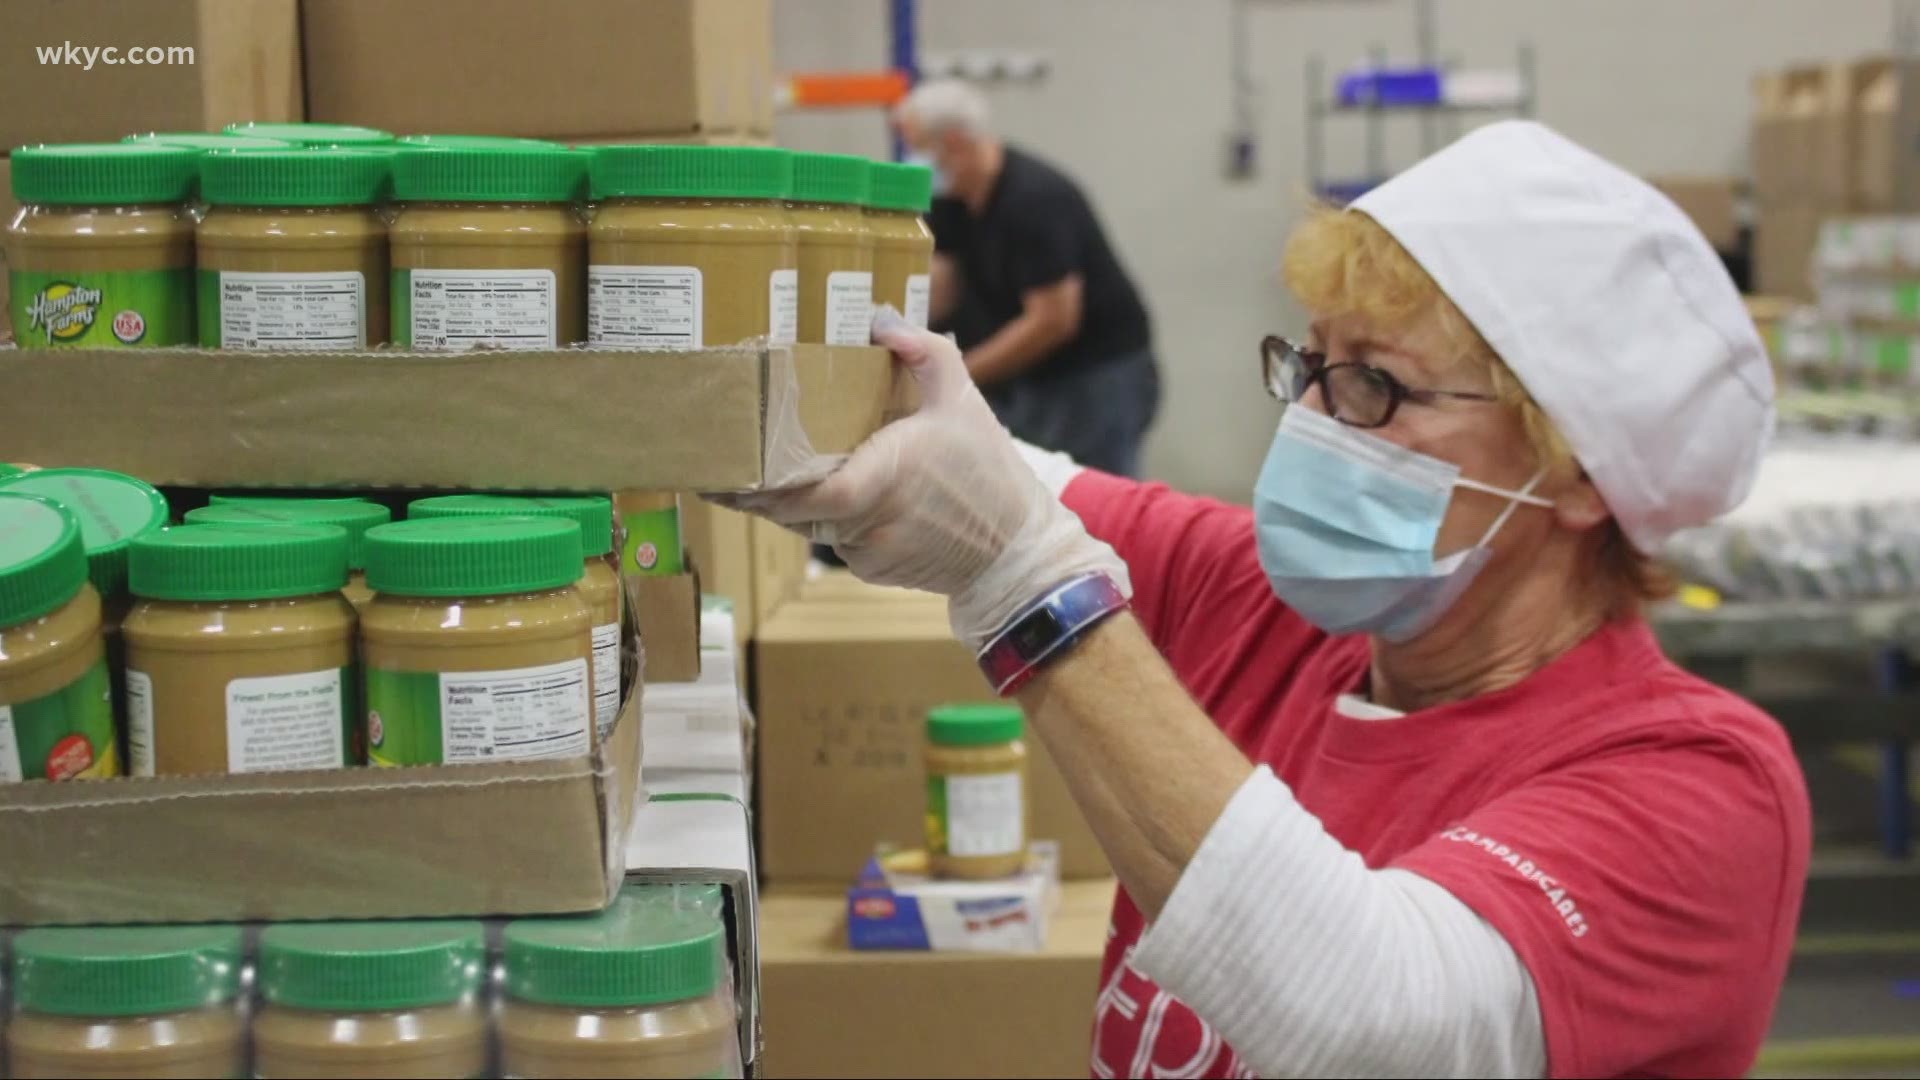 Here are a few ways you can safely volunteer this holiday season amid the COVID-19 pandemic.